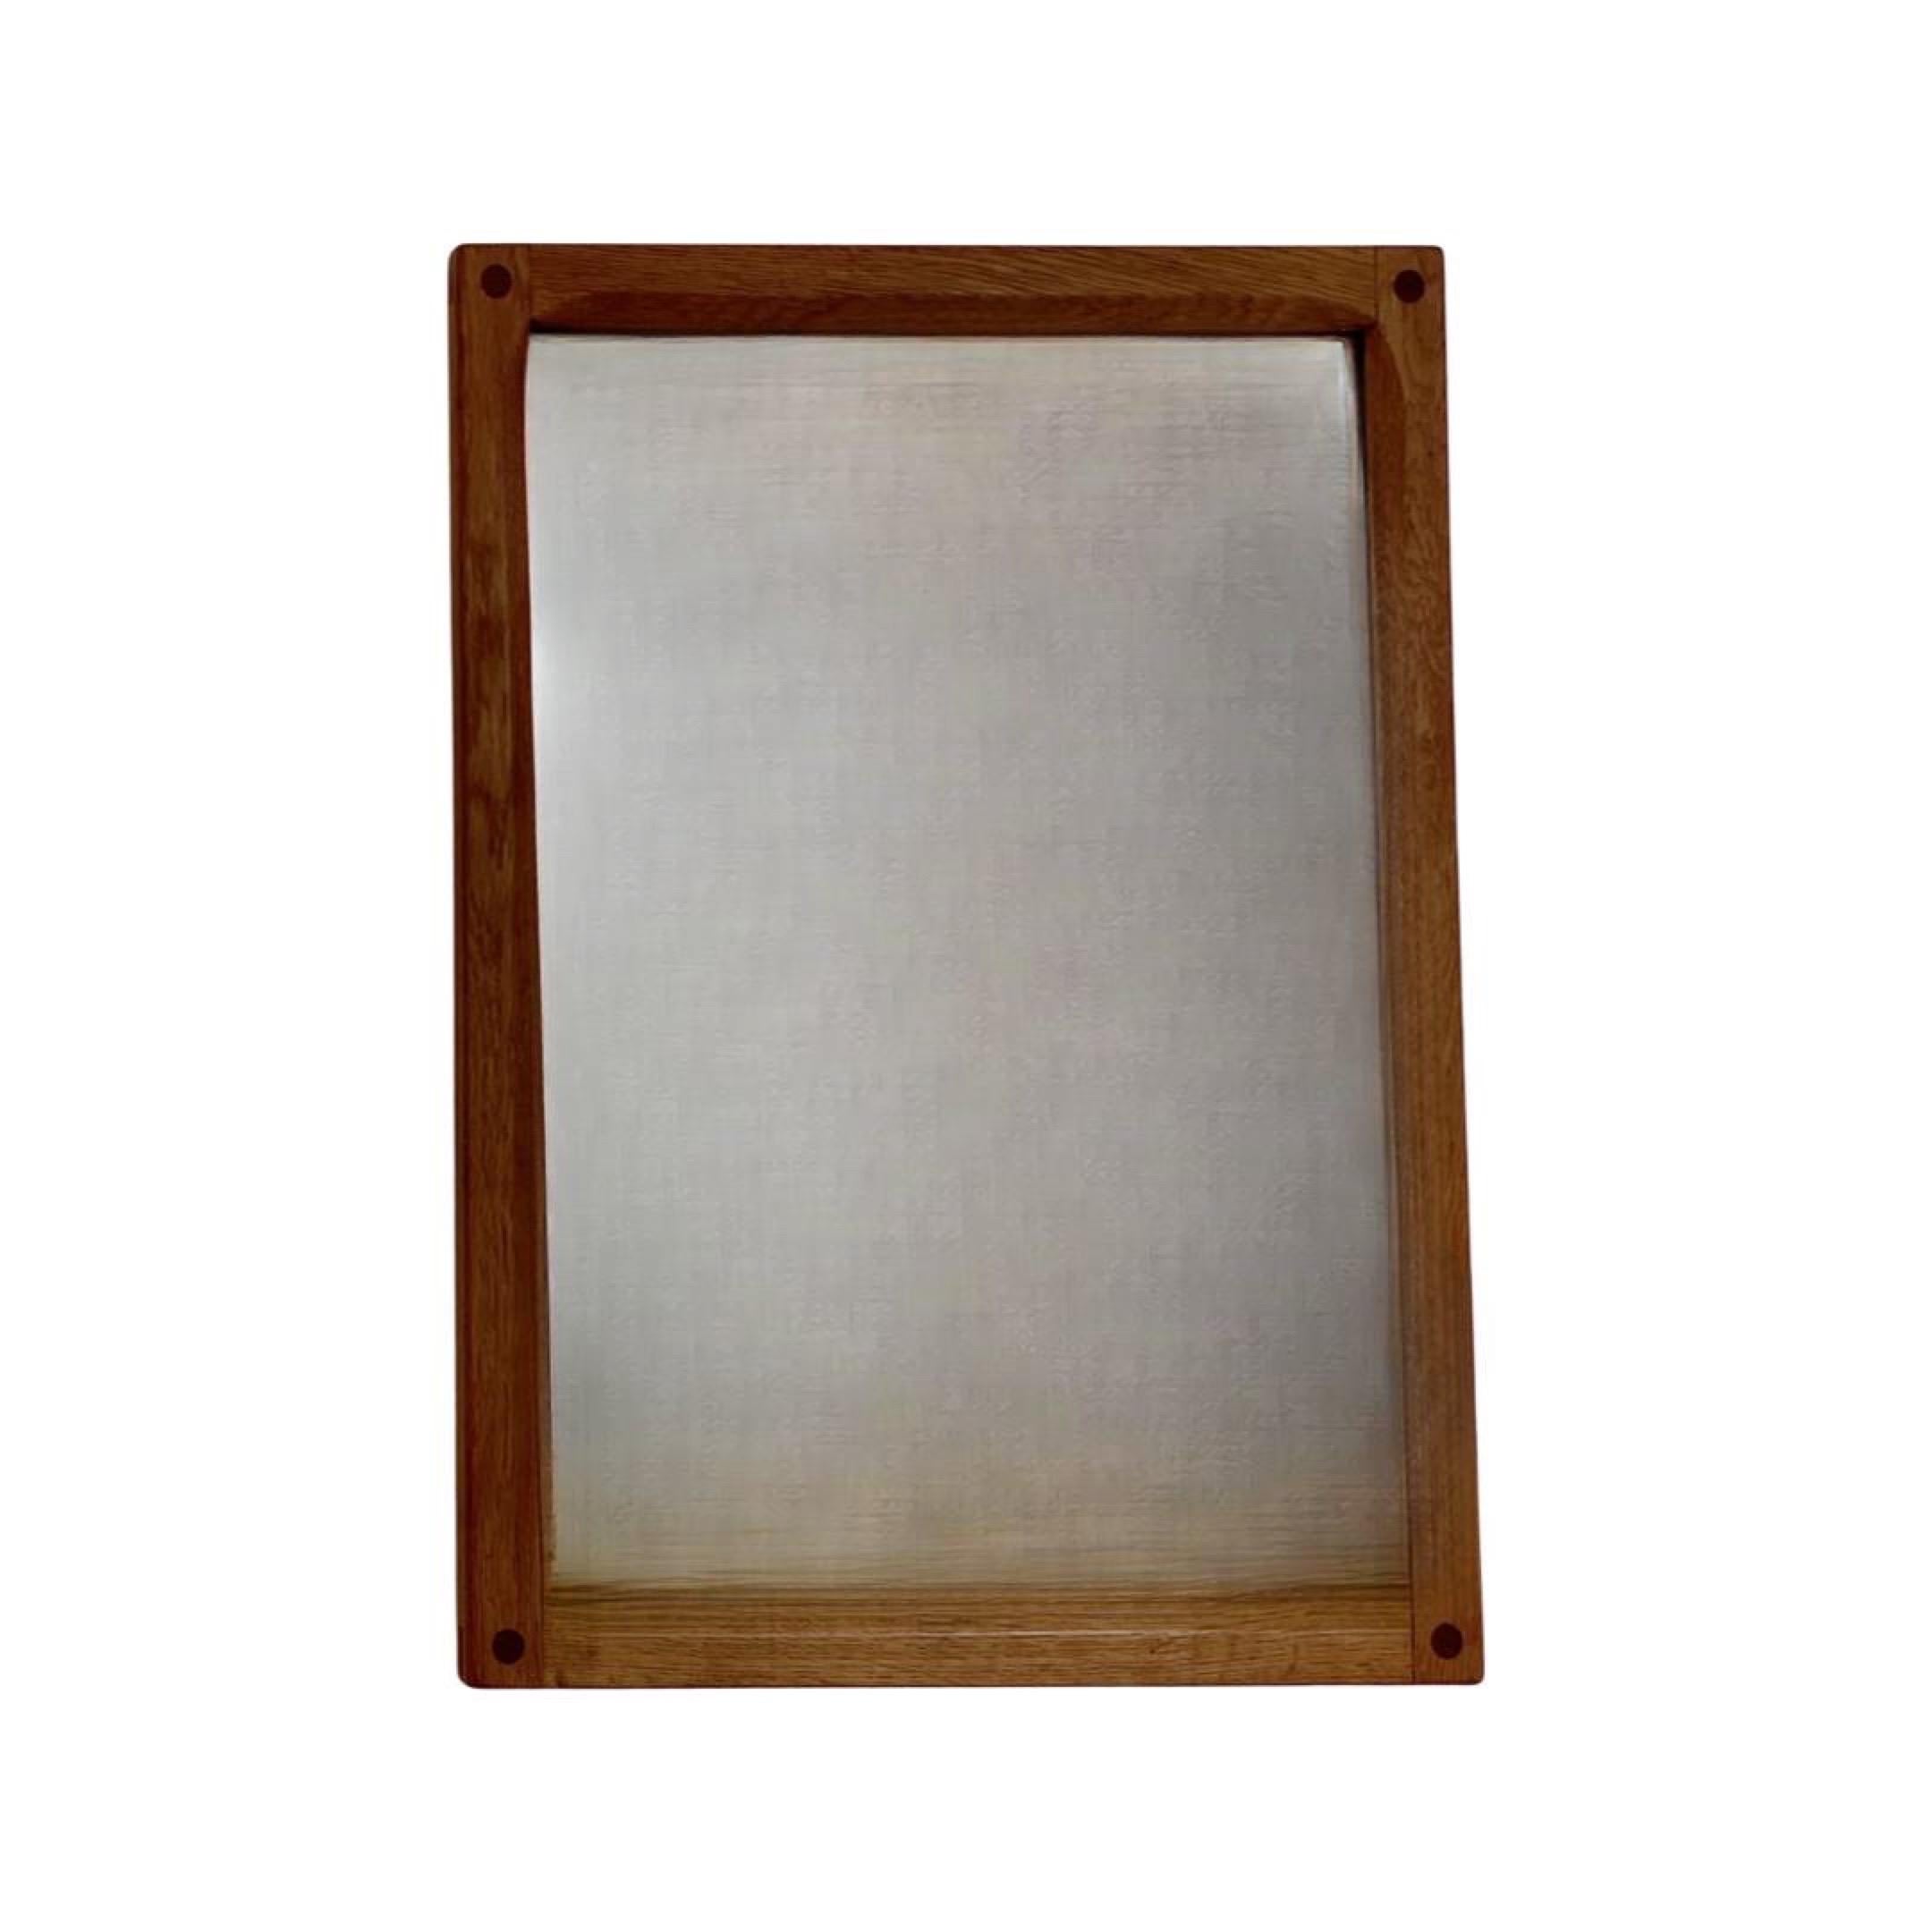 Scandinavian Modern rectangular wall mirror by Kai Kristiansen, Denmark circa 1960's

This iconic teak and oak mirror is a Model 161 by famous Danish carpenter Aksel Kjersgaard, from the small town Odder.
from Odder. These mirrors were made on order